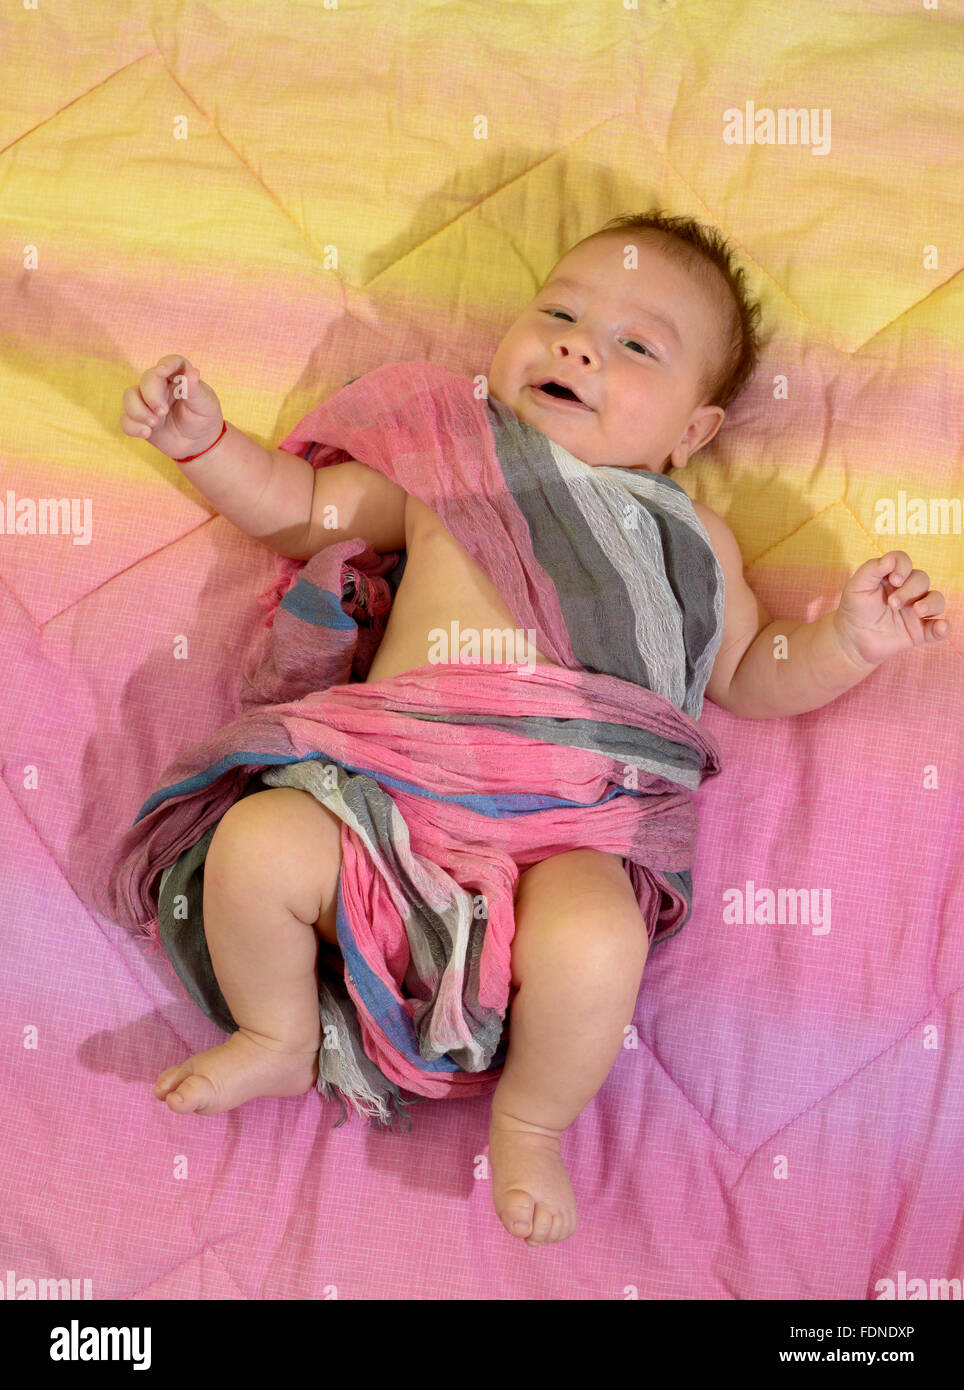 Newborn baby boy wrapped in a pink scarf Stock Photo